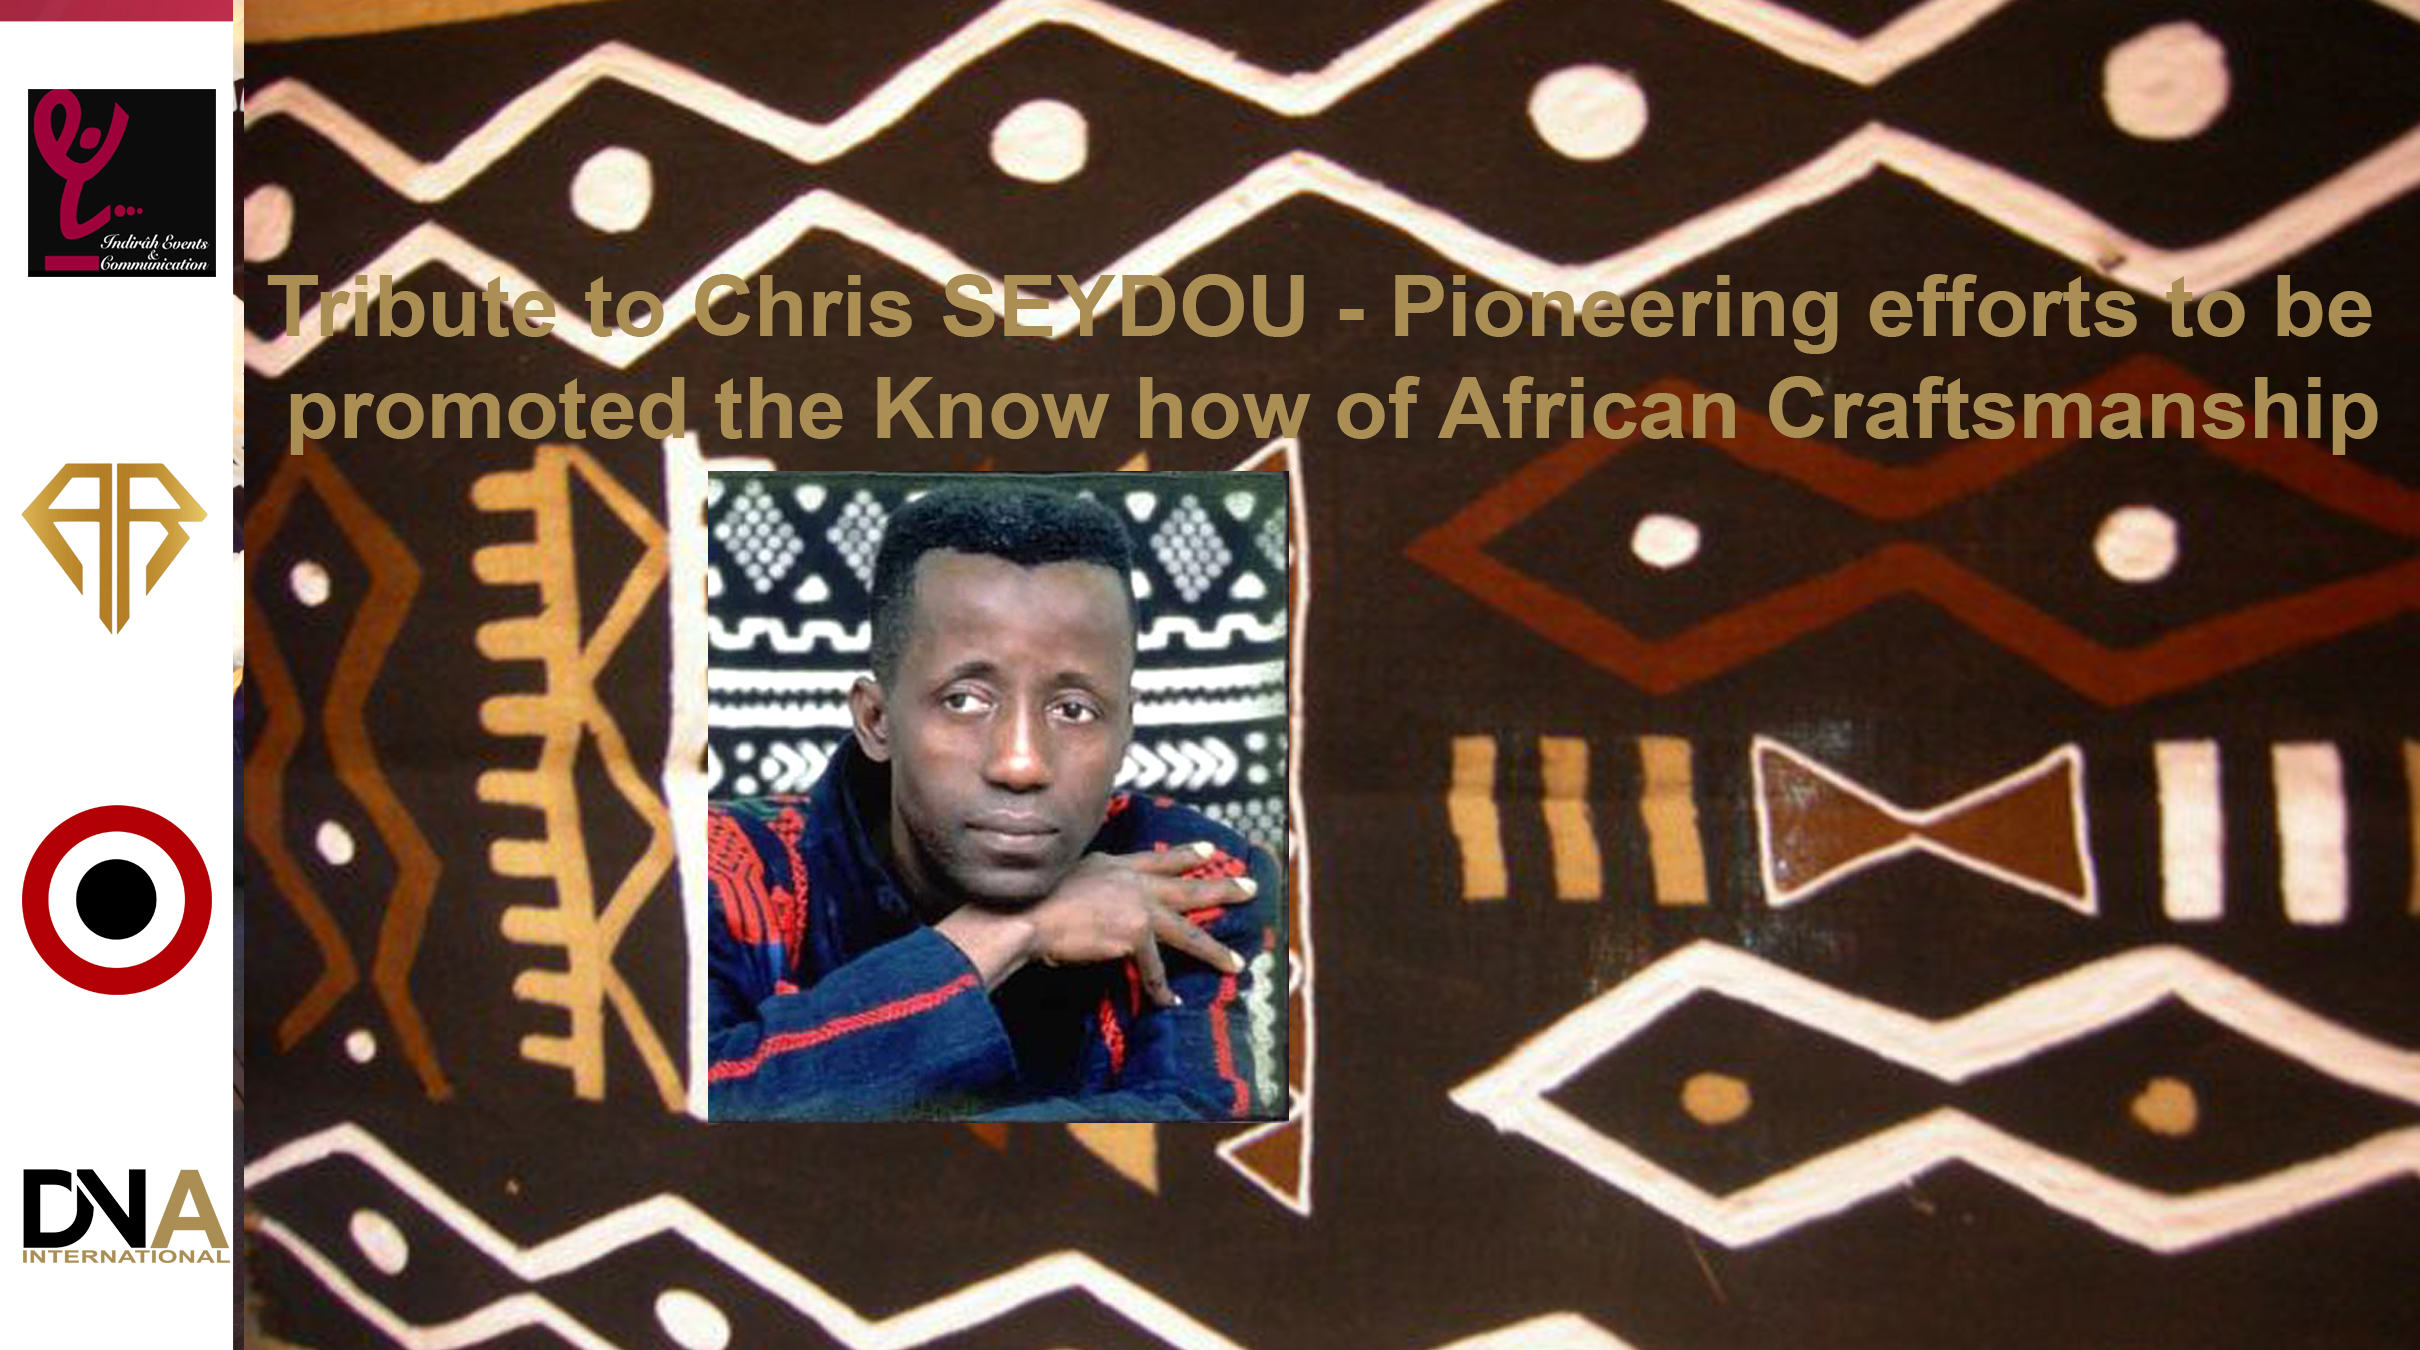 AFRICA-VOGUE-COVER-Tribute-to-Chris-SEYDOU-Pioneering-efforts-to-be-promoted-the-Know-how-of-African-Craftsmanship-DN-AFRICA-MEDIA-PARTNER